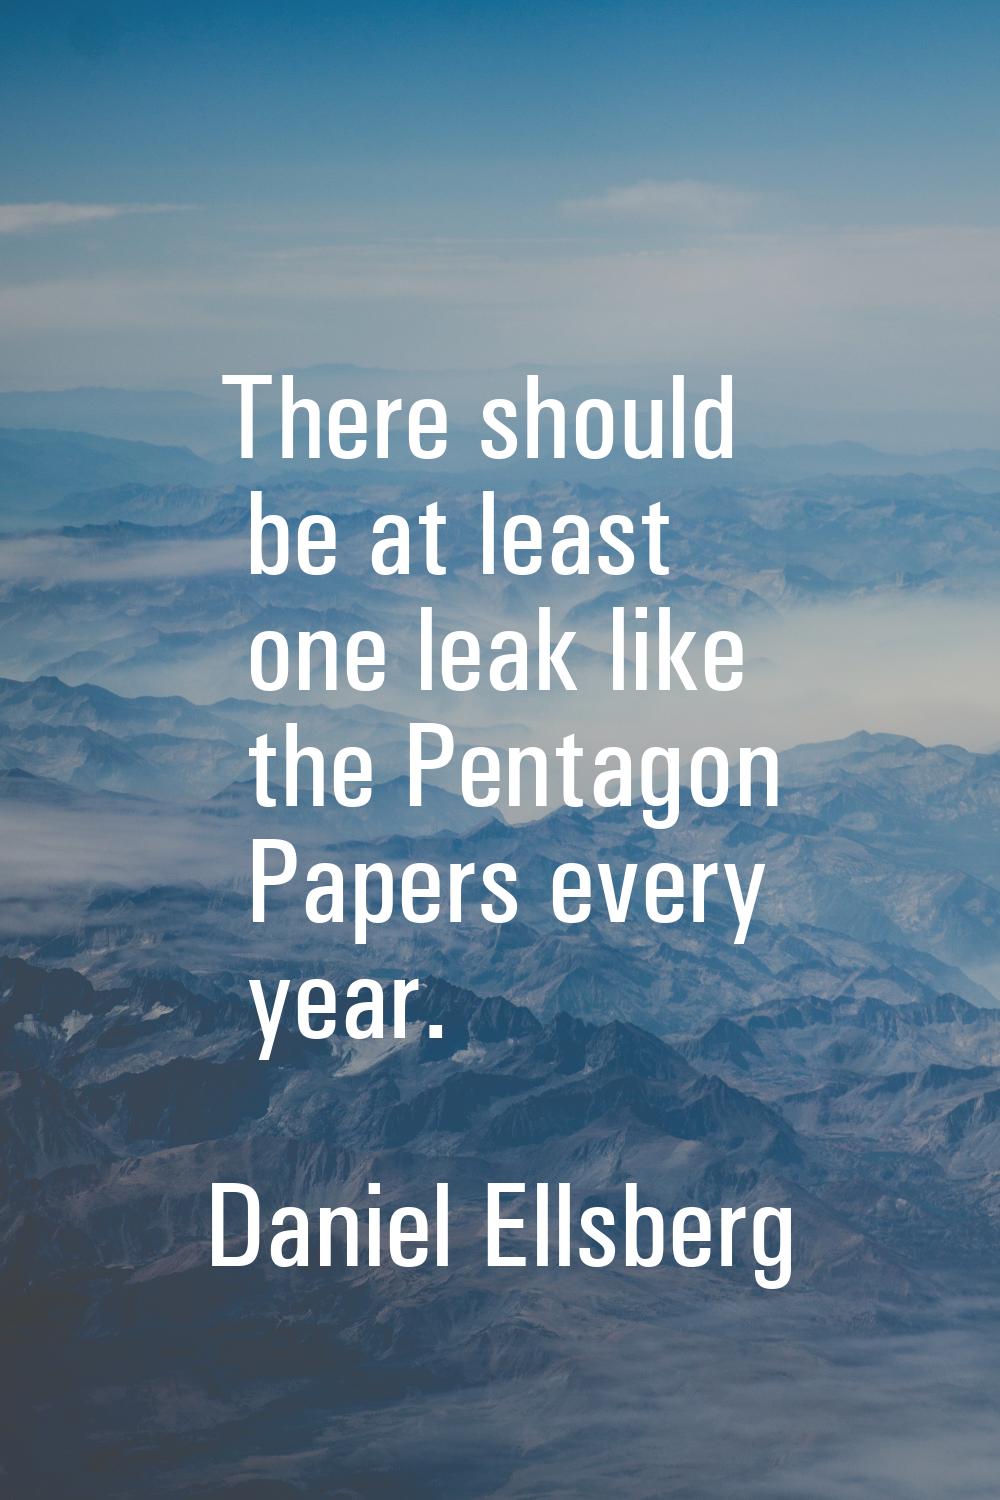 There should be at least one leak like the Pentagon Papers every year.